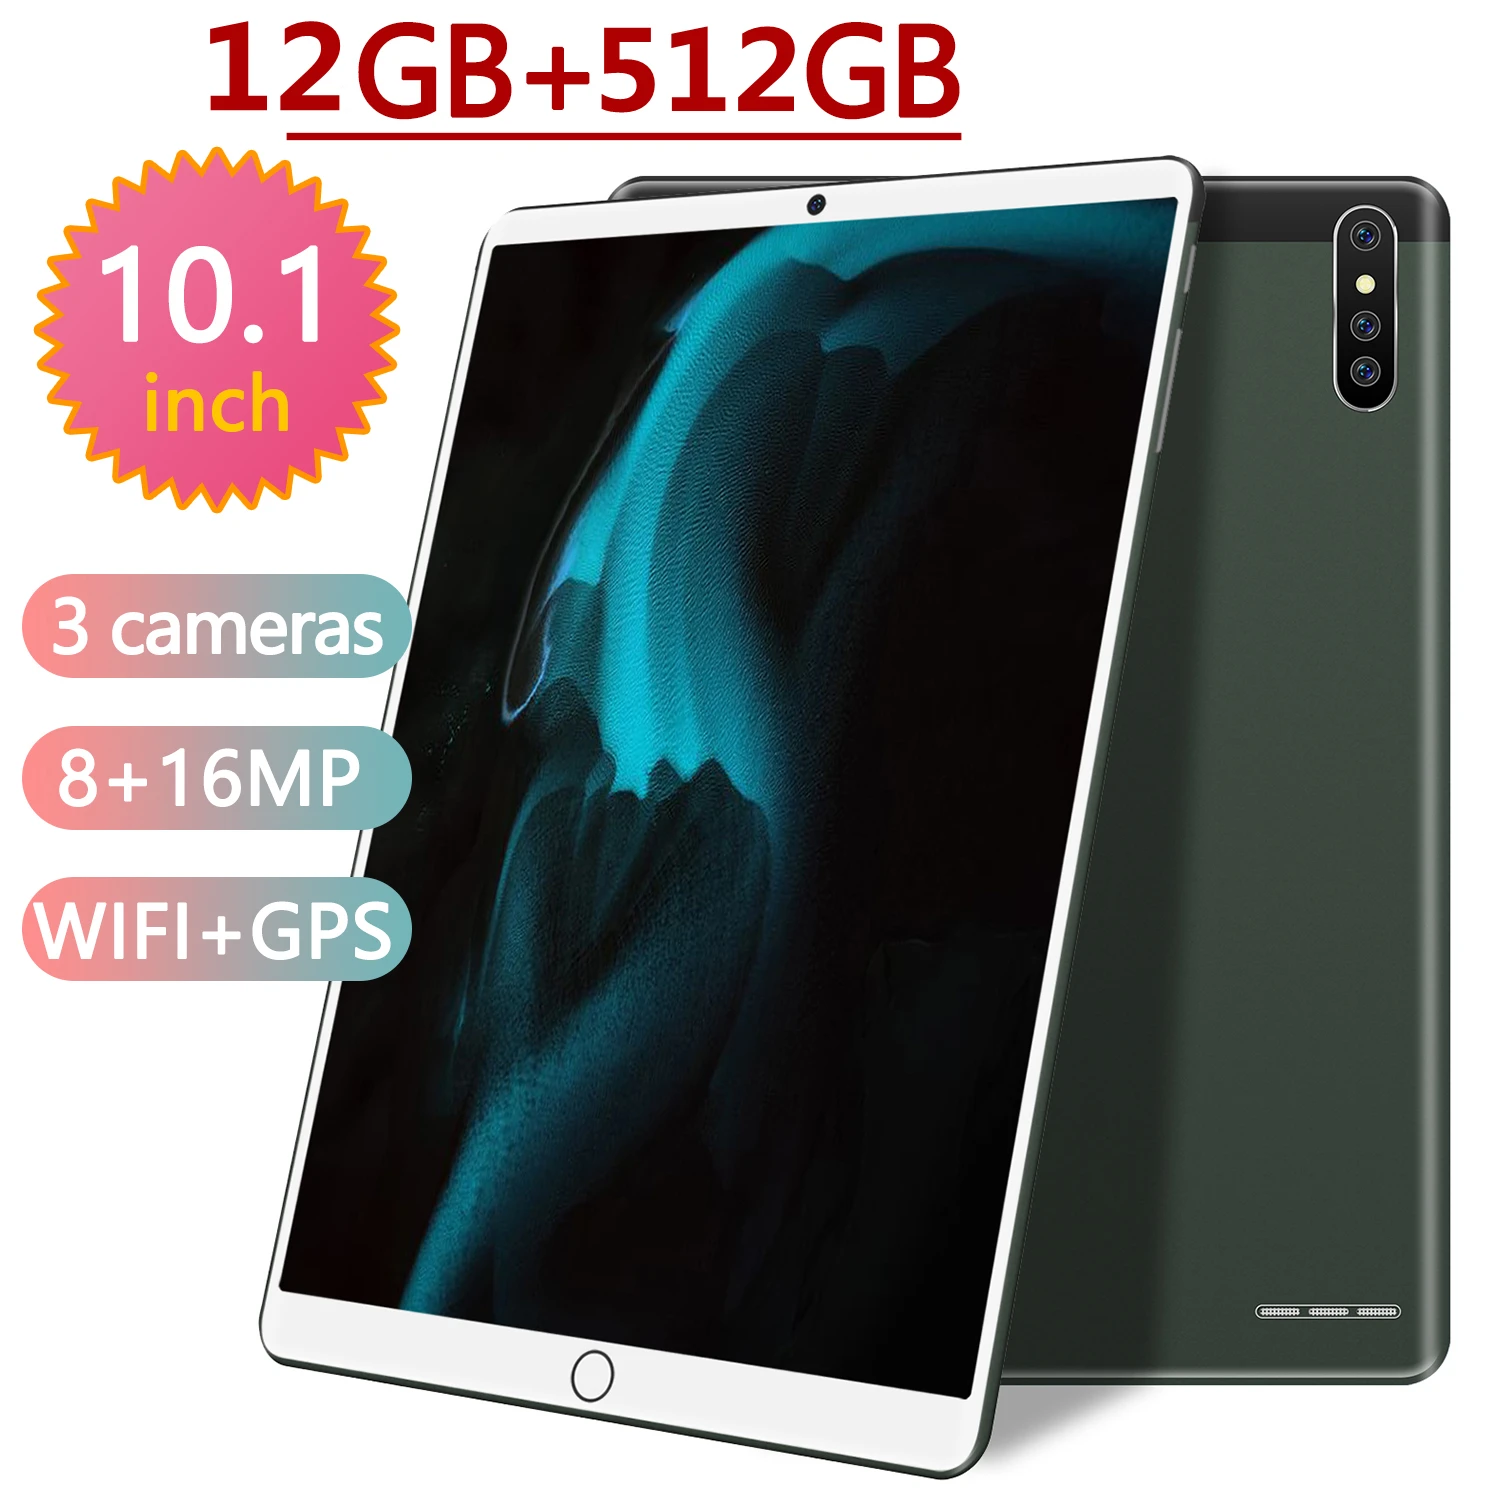 Tablette H18 Dual SIM 5G Deca Core Laptop Google Play 8800mAh Pad Firmware Global 10.1Inch 12GB RAM 512GB Office GPS Tablet PC latest samsung tablet